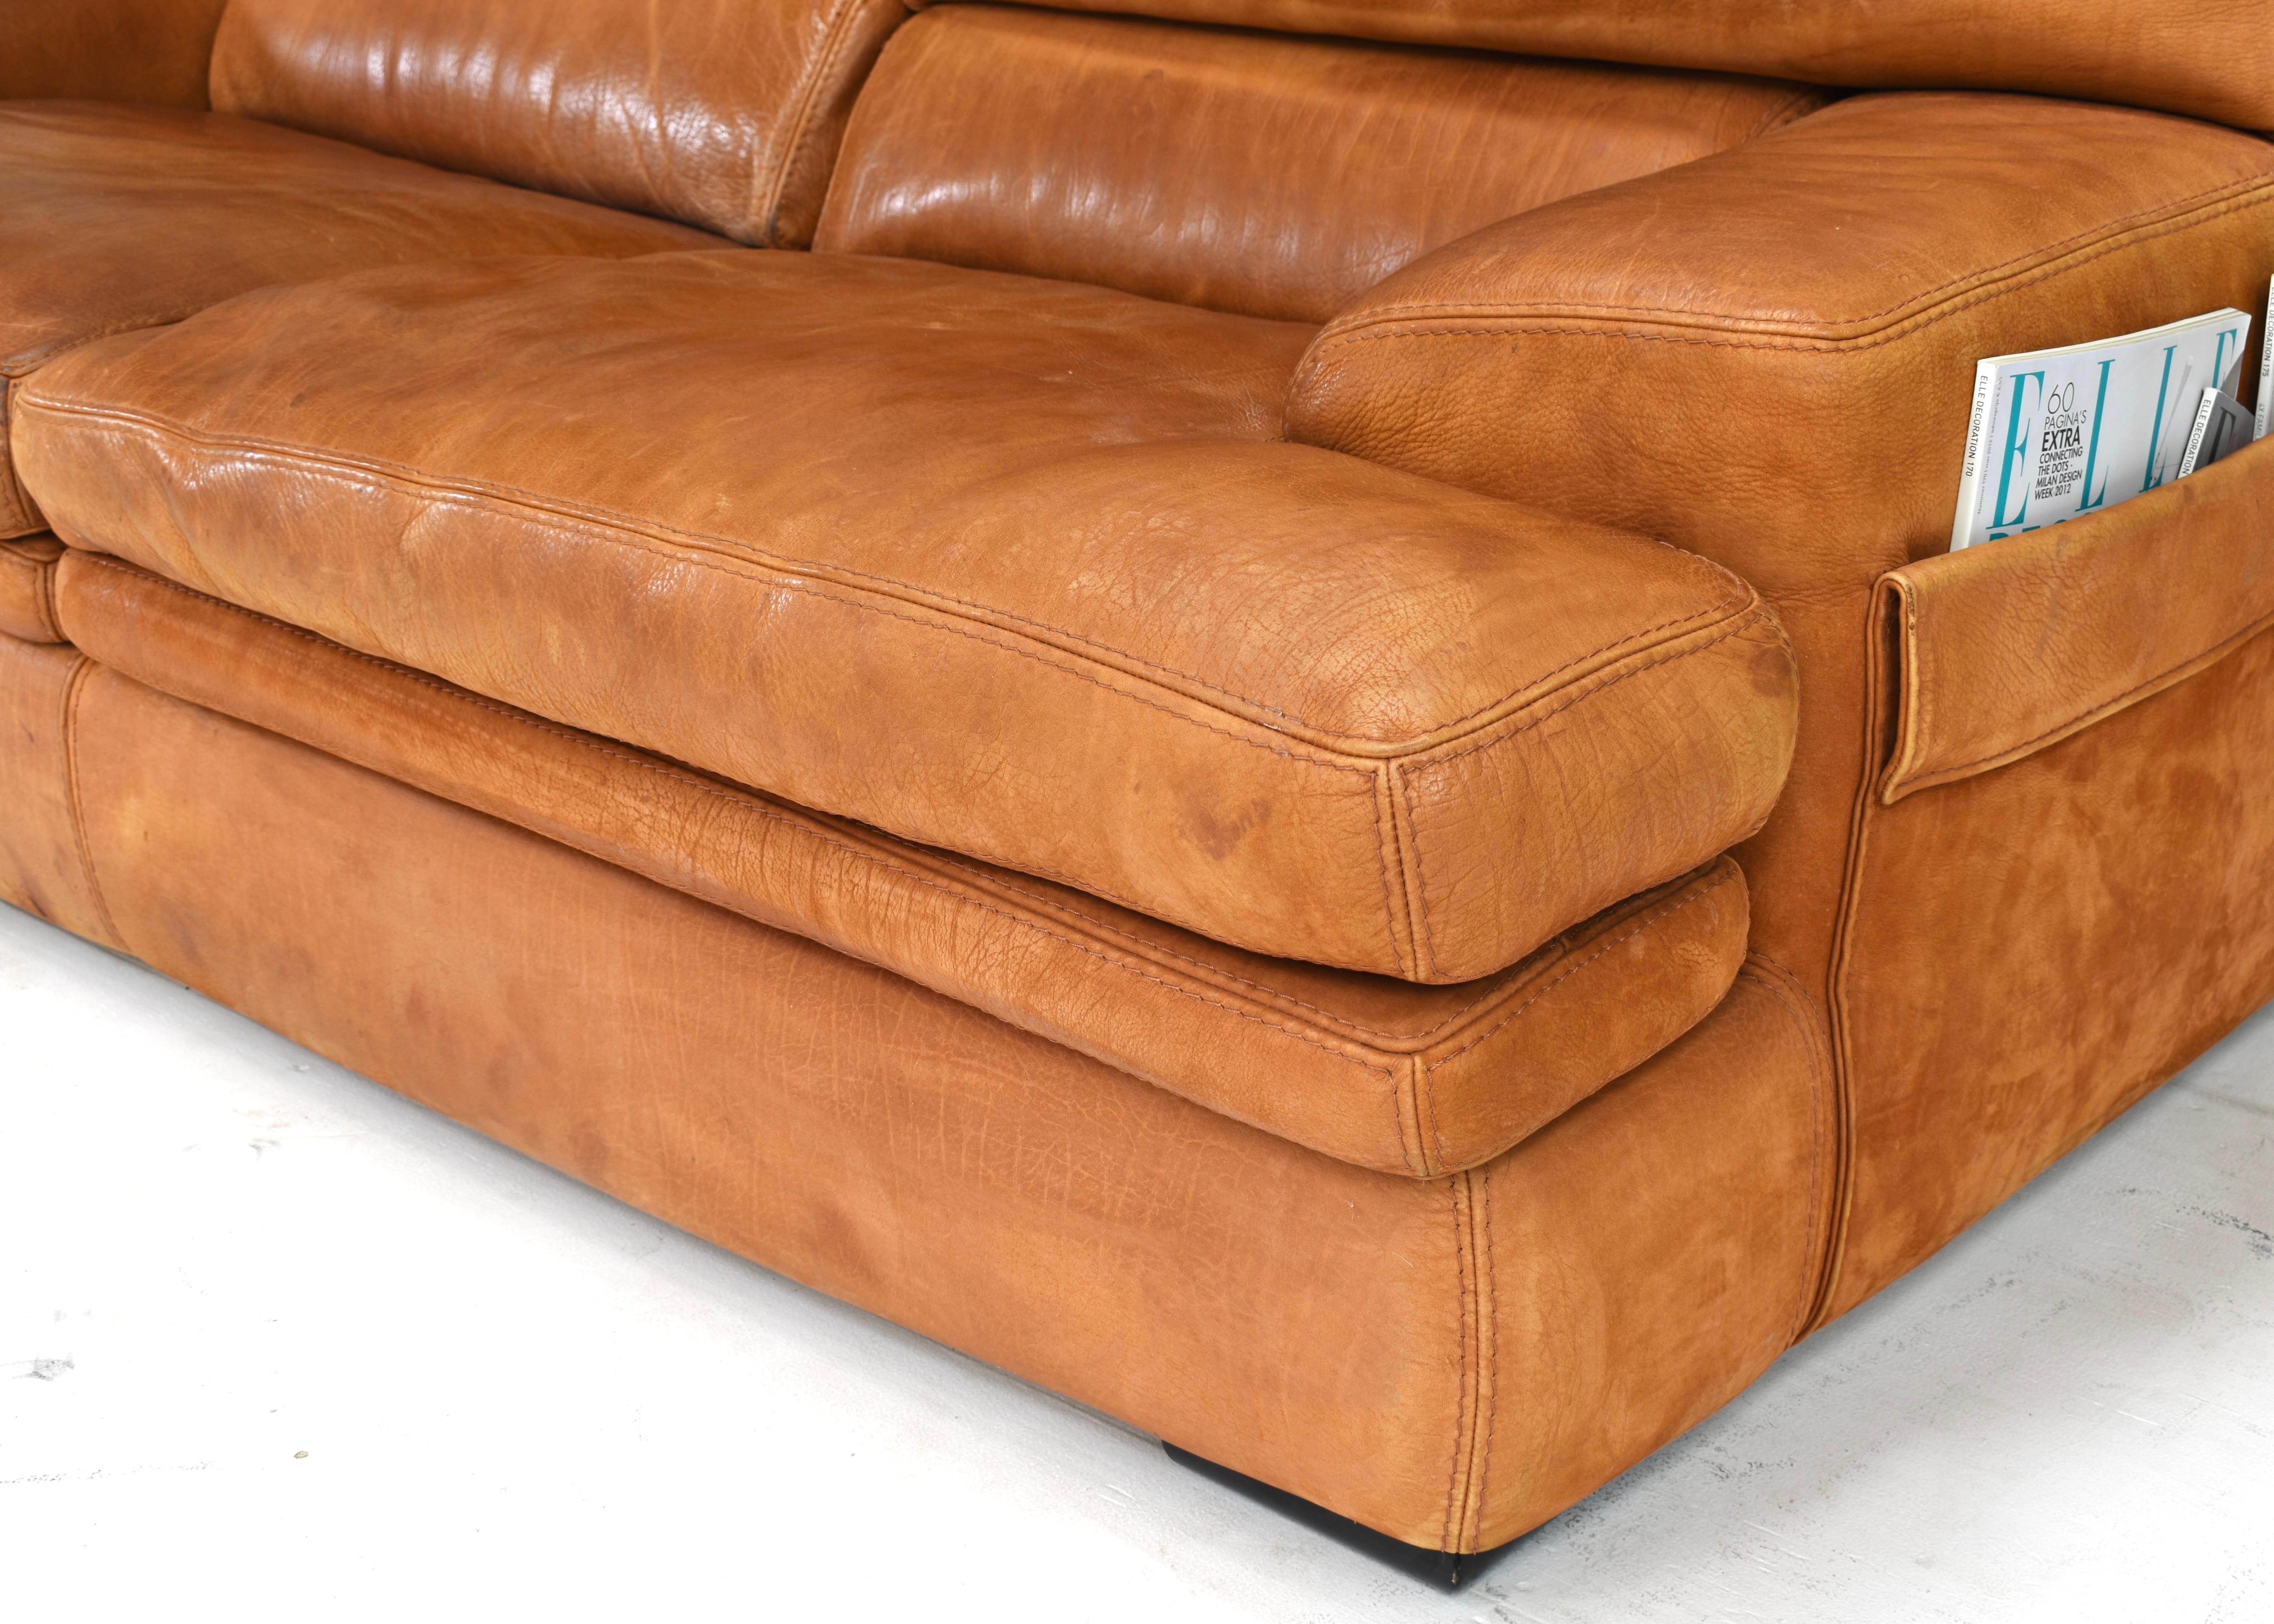 Roche Bobois sofa in patinated Tan / Cognac leather – France, circa 1970/80 In Good Condition For Sale In Pijnacker, Zuid-Holland